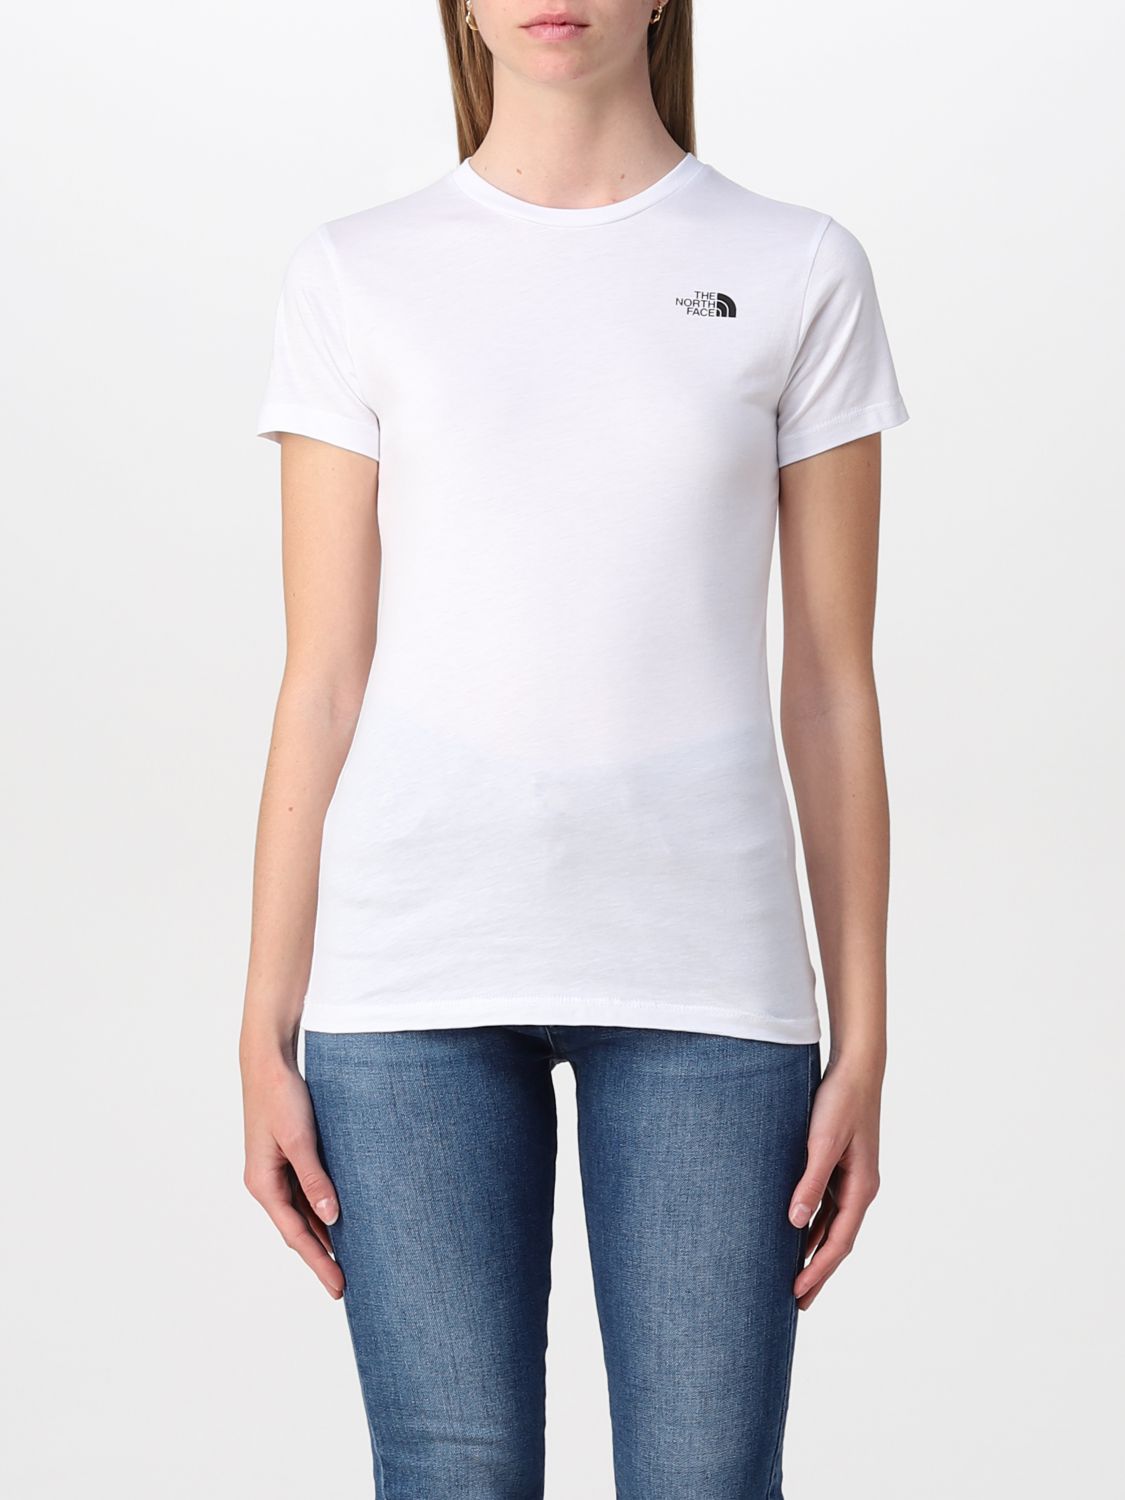 THE NORTH FACE: basic t-shirt with logo - White | The North Face t ...